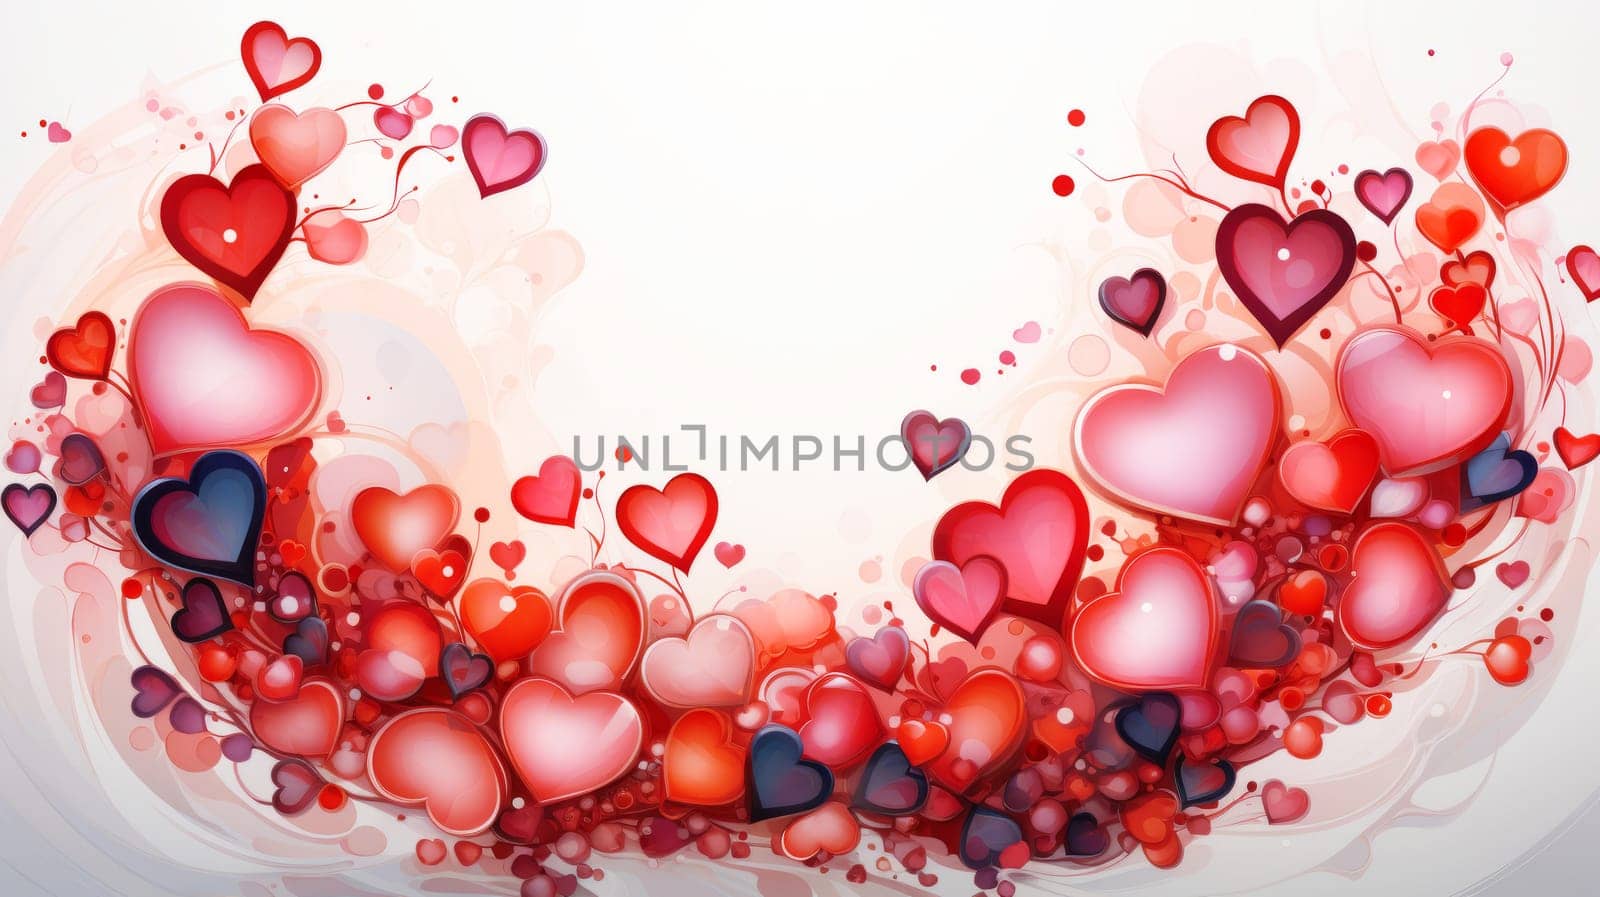 Valentine's Day composition. Hearts with place for text.